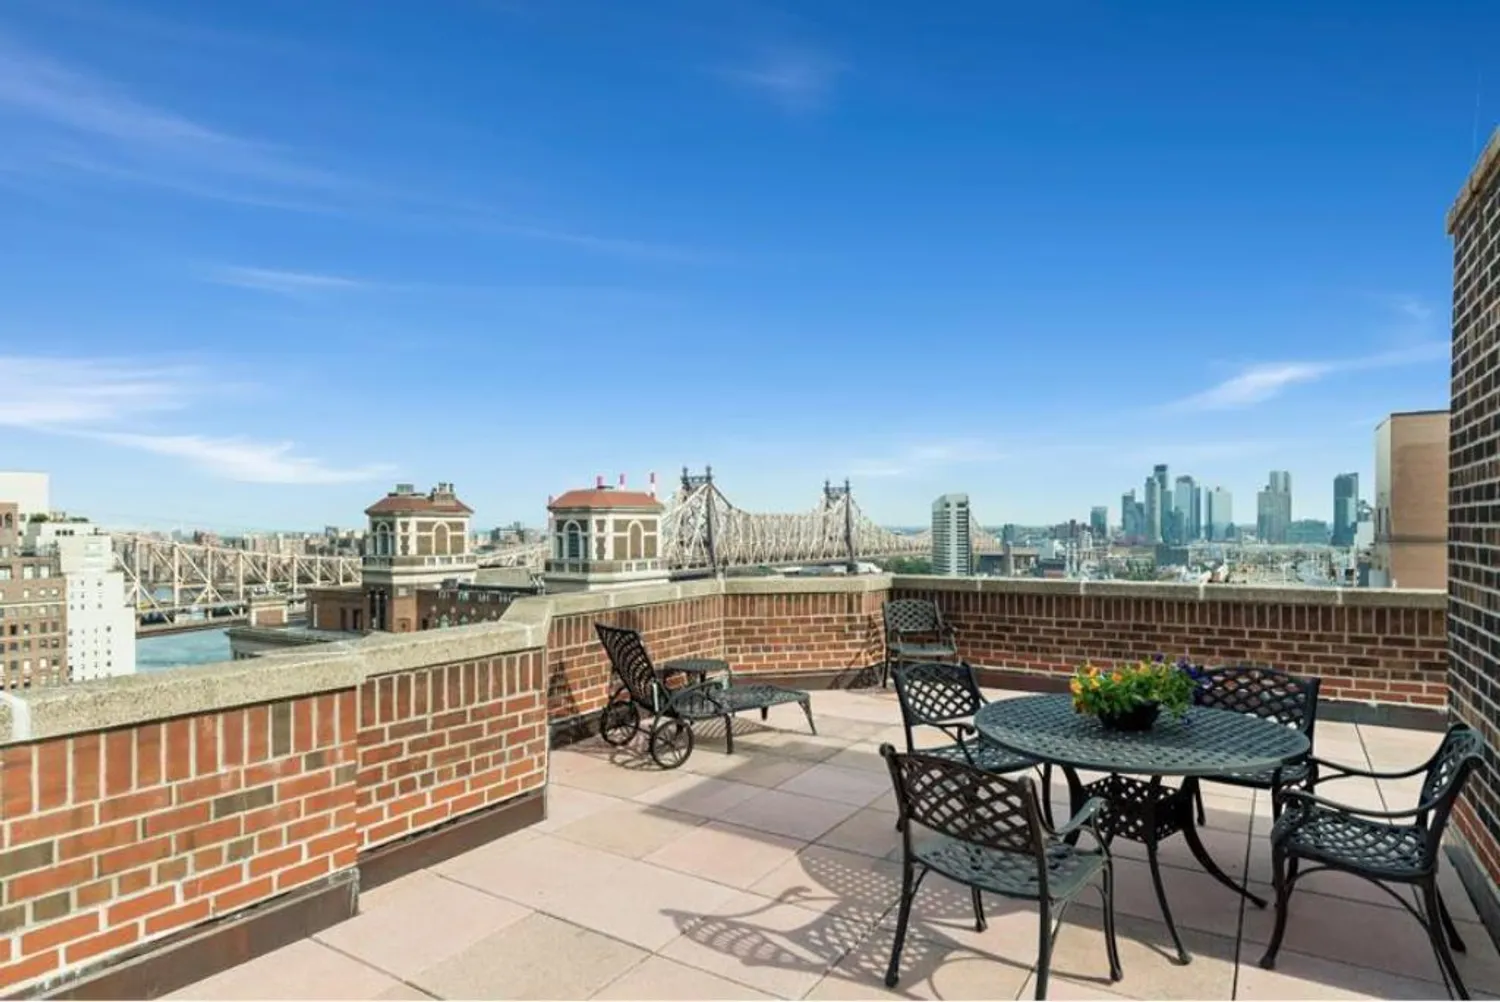 Roof top terrace- Amazing East River views